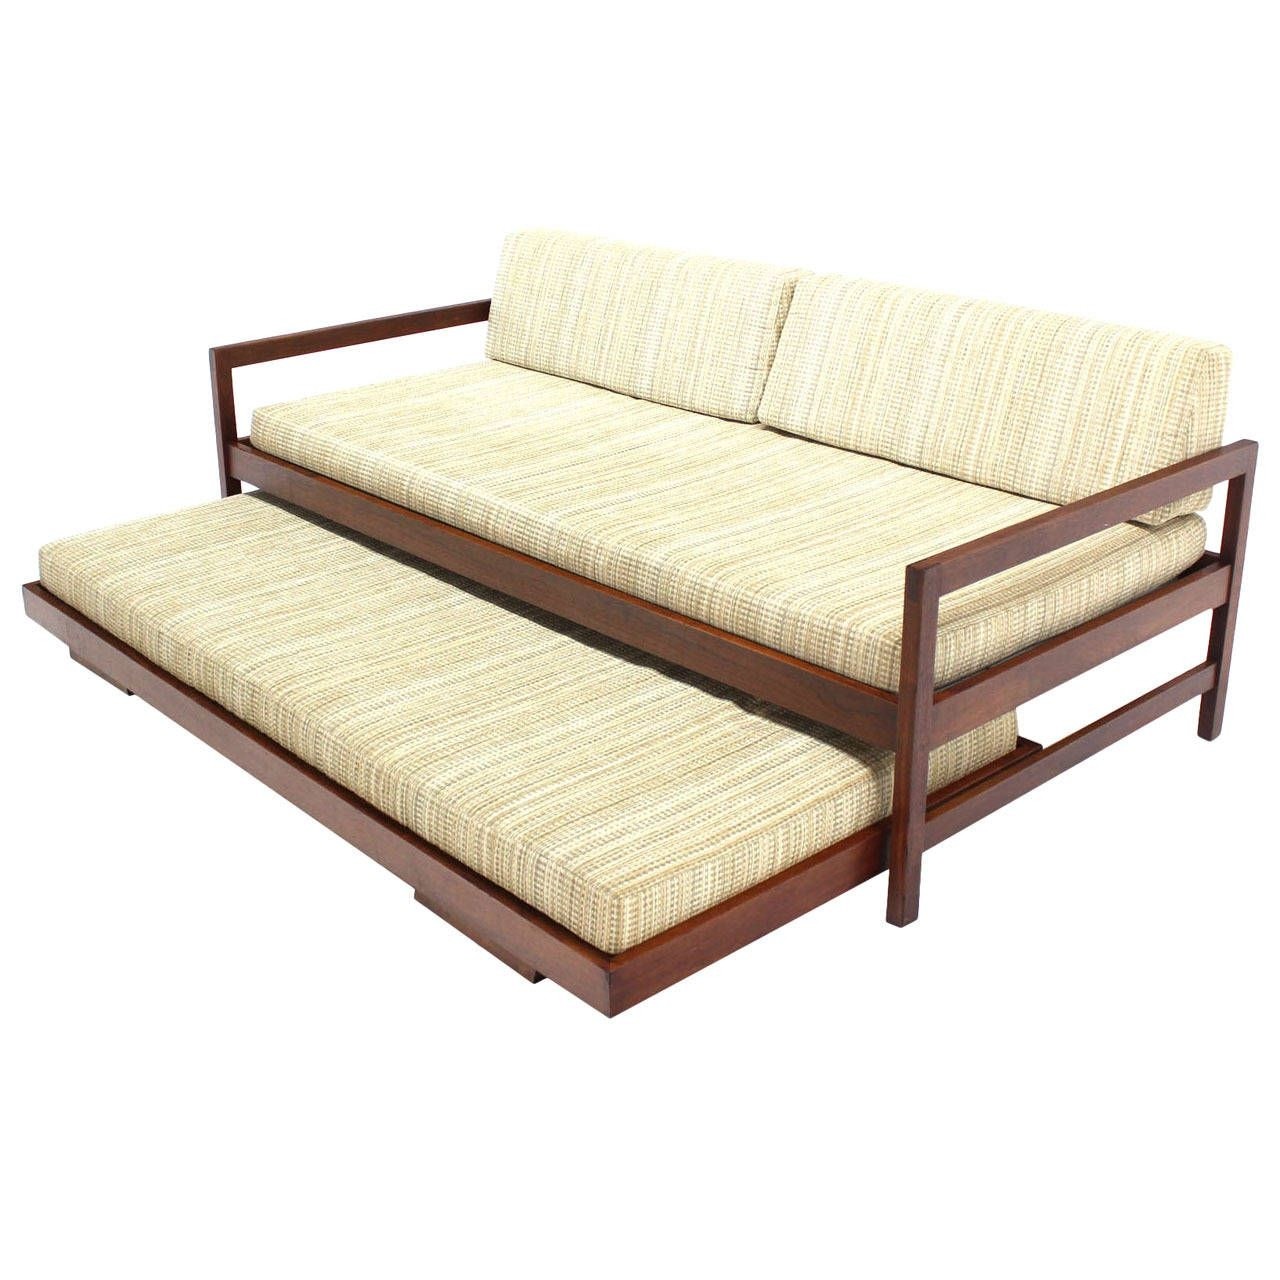 Solid Walnut Frame Mid Century Modern Trundle Pull Out Bed Daybed Sofa